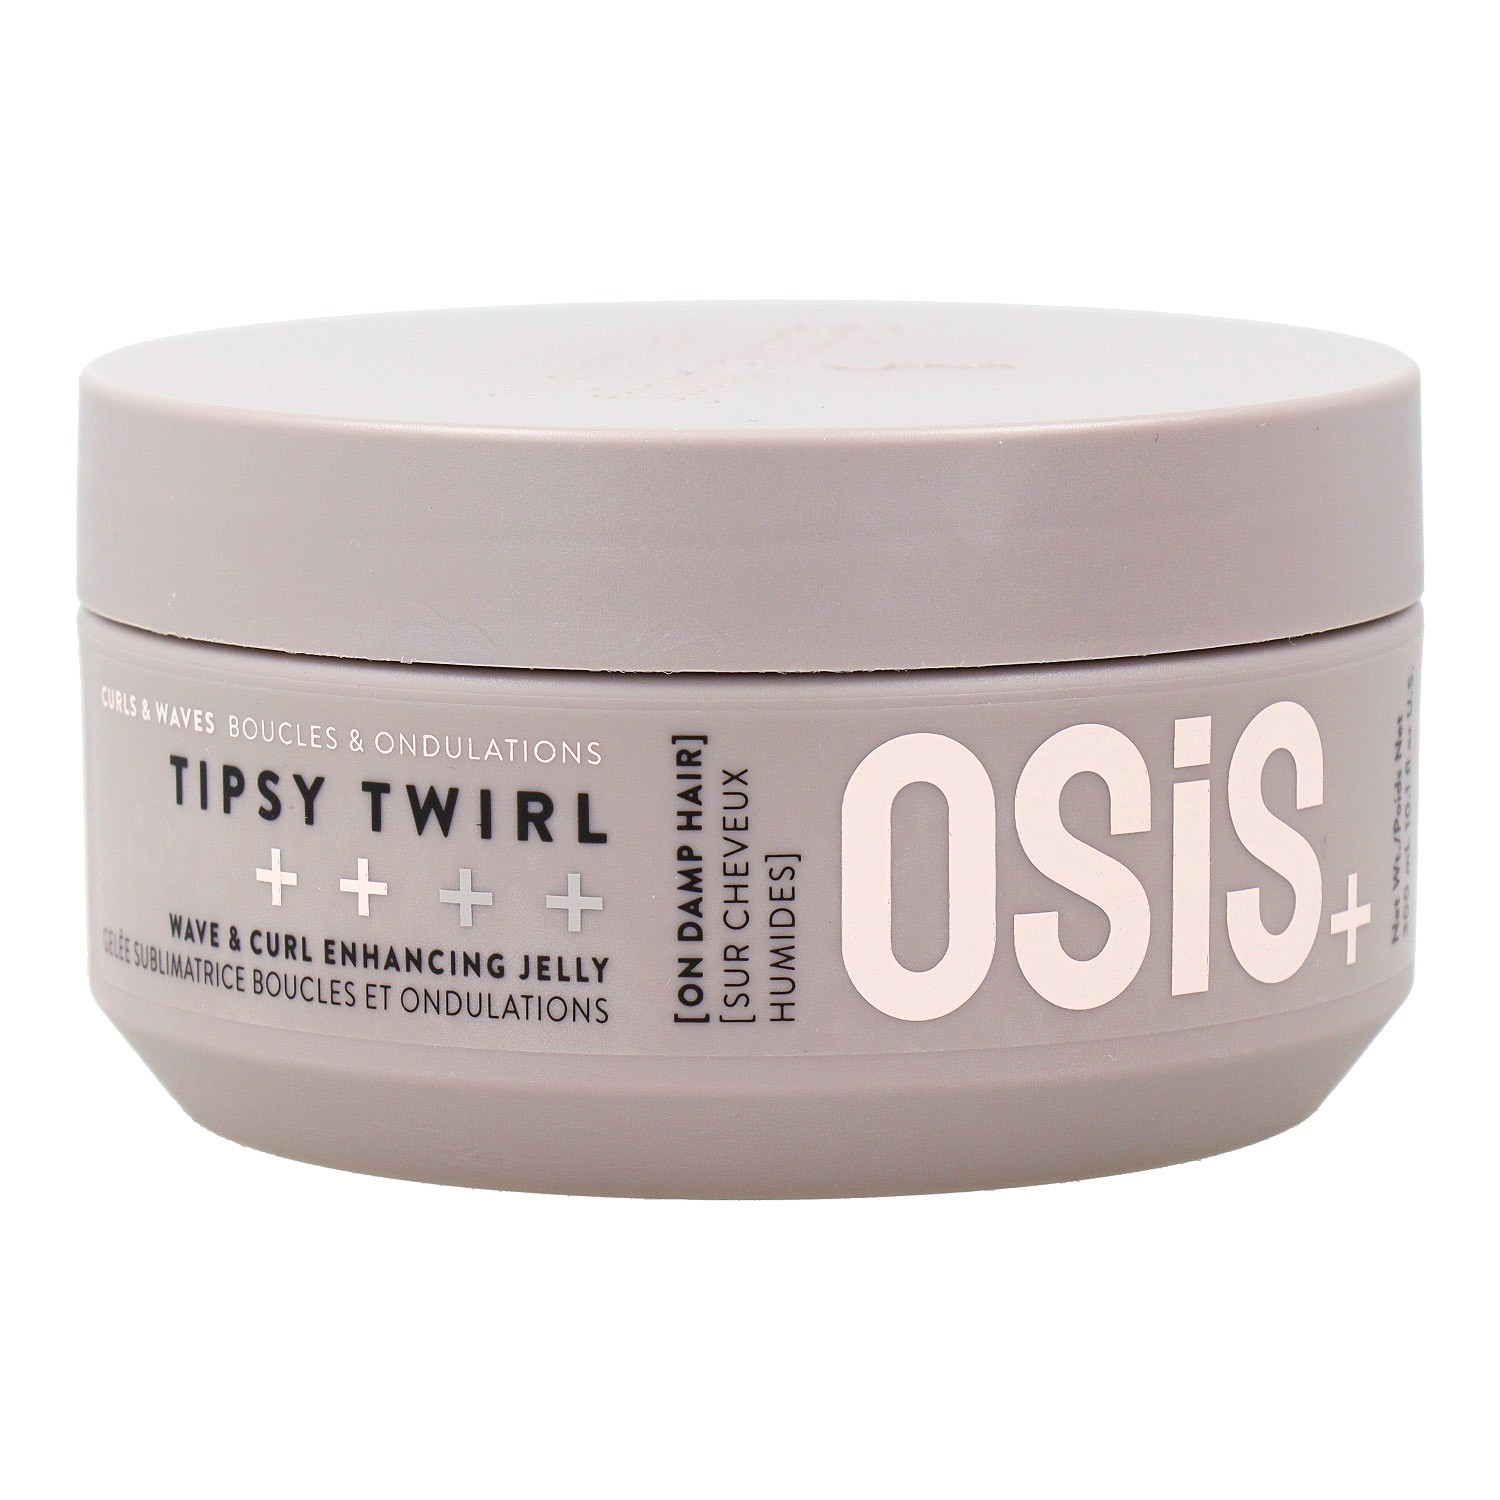 Schwarzkopf Osis Curls And Waves Tipsy Twirl Jelly 300 ml